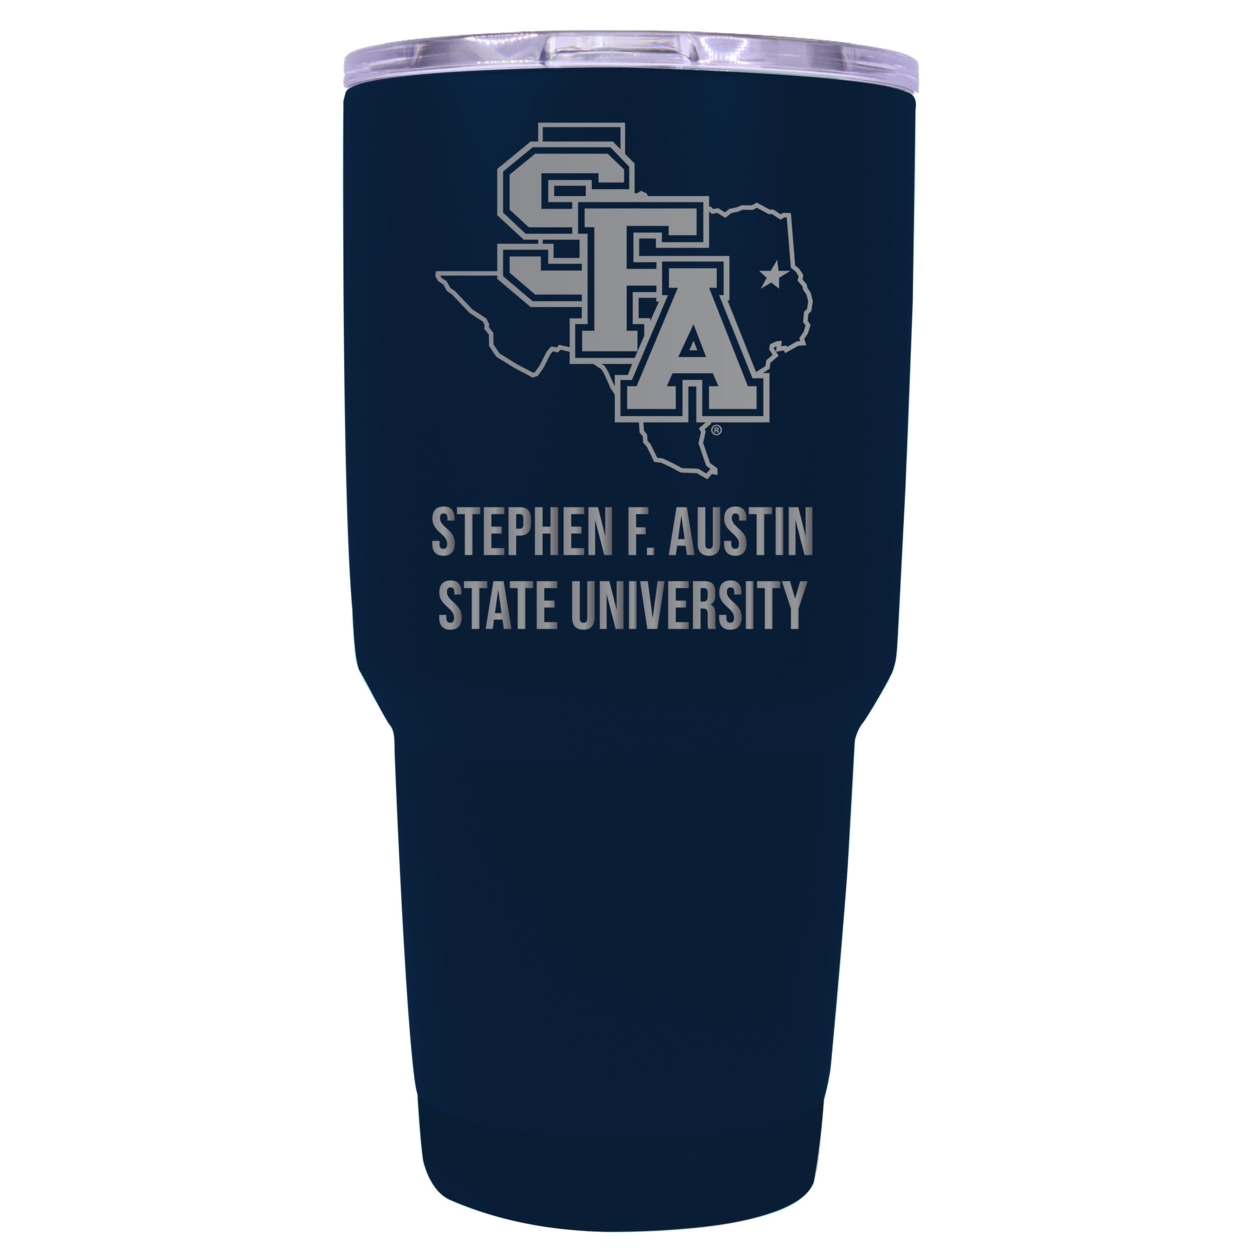 Stephen F. Austin State University 24 Oz Insulated Tumbler Etched - Choose Your Color - Navy